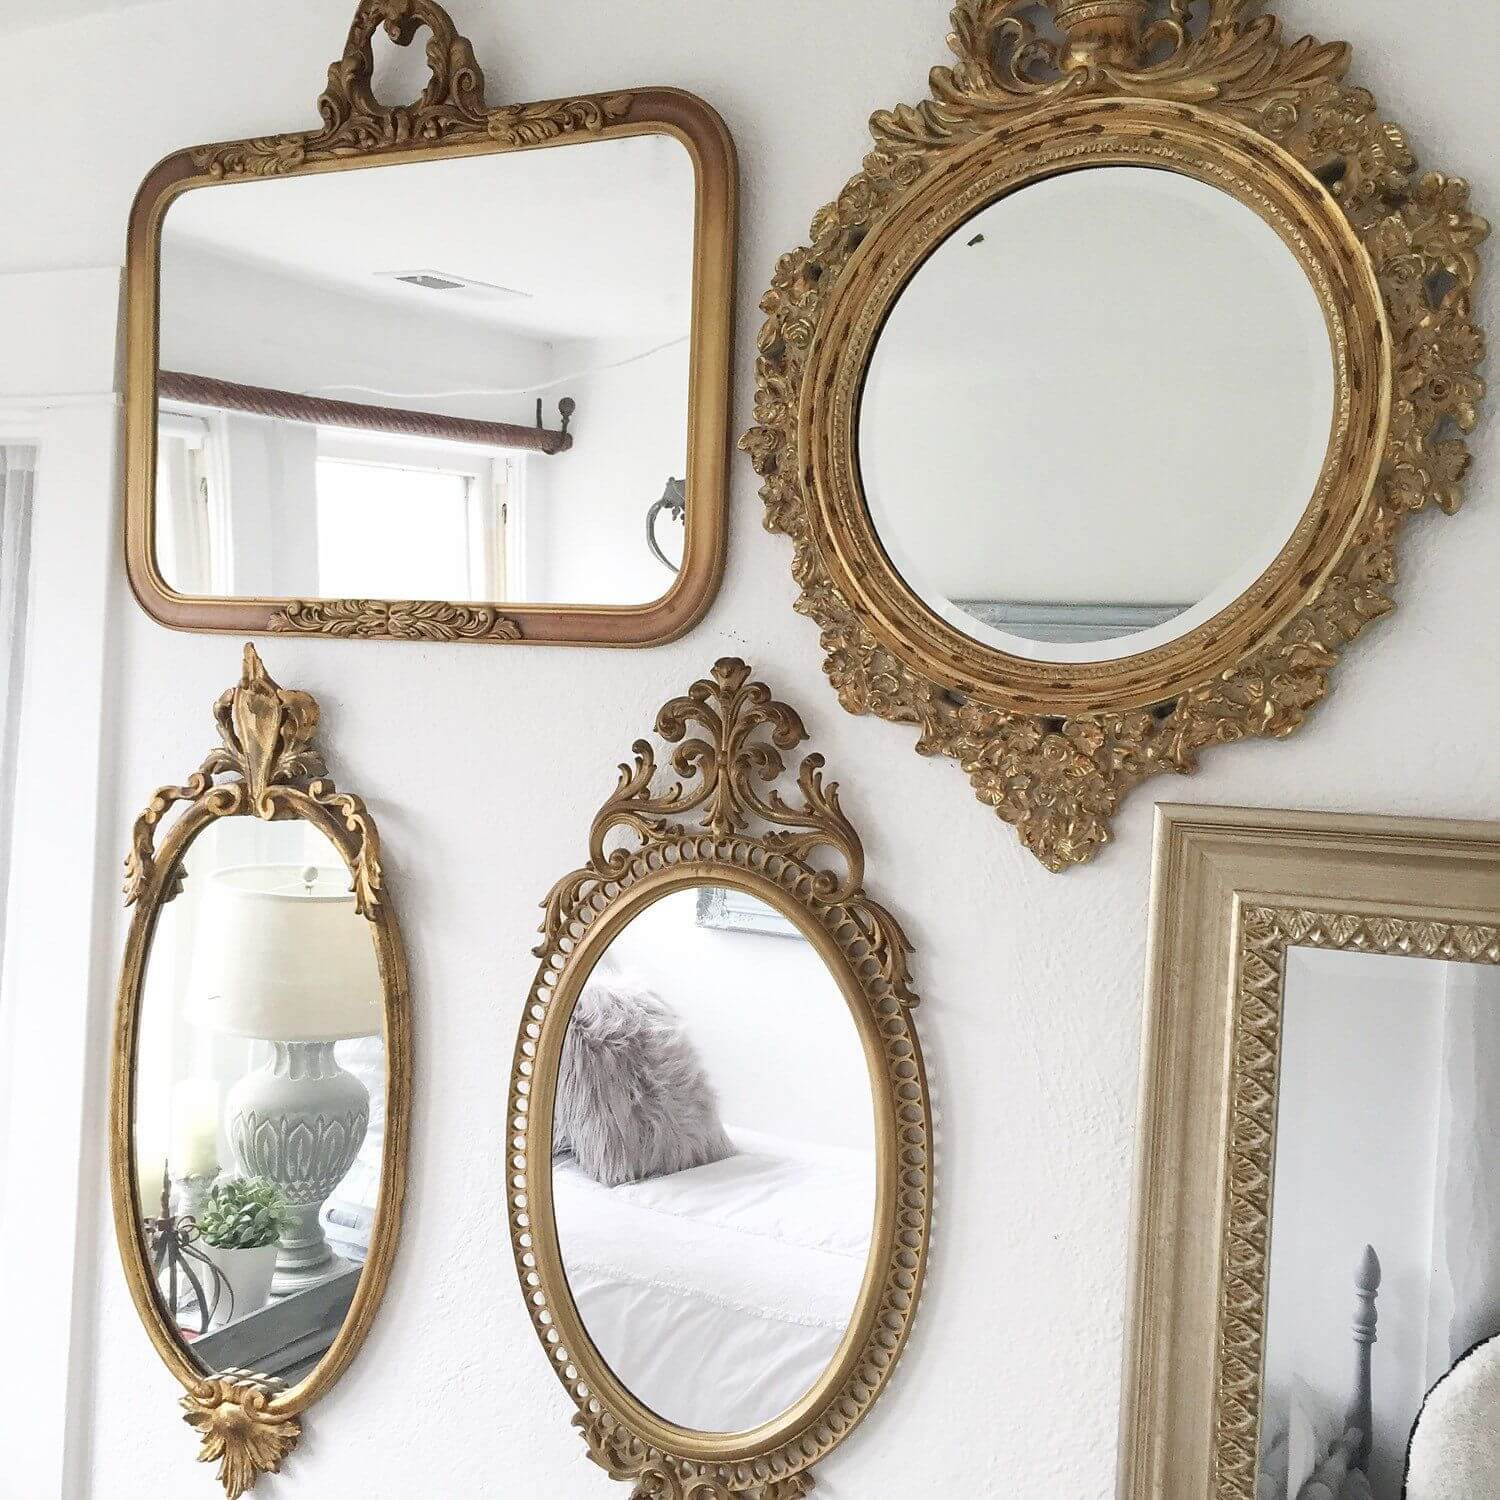 Buy Decorative Wall Mirrors Online